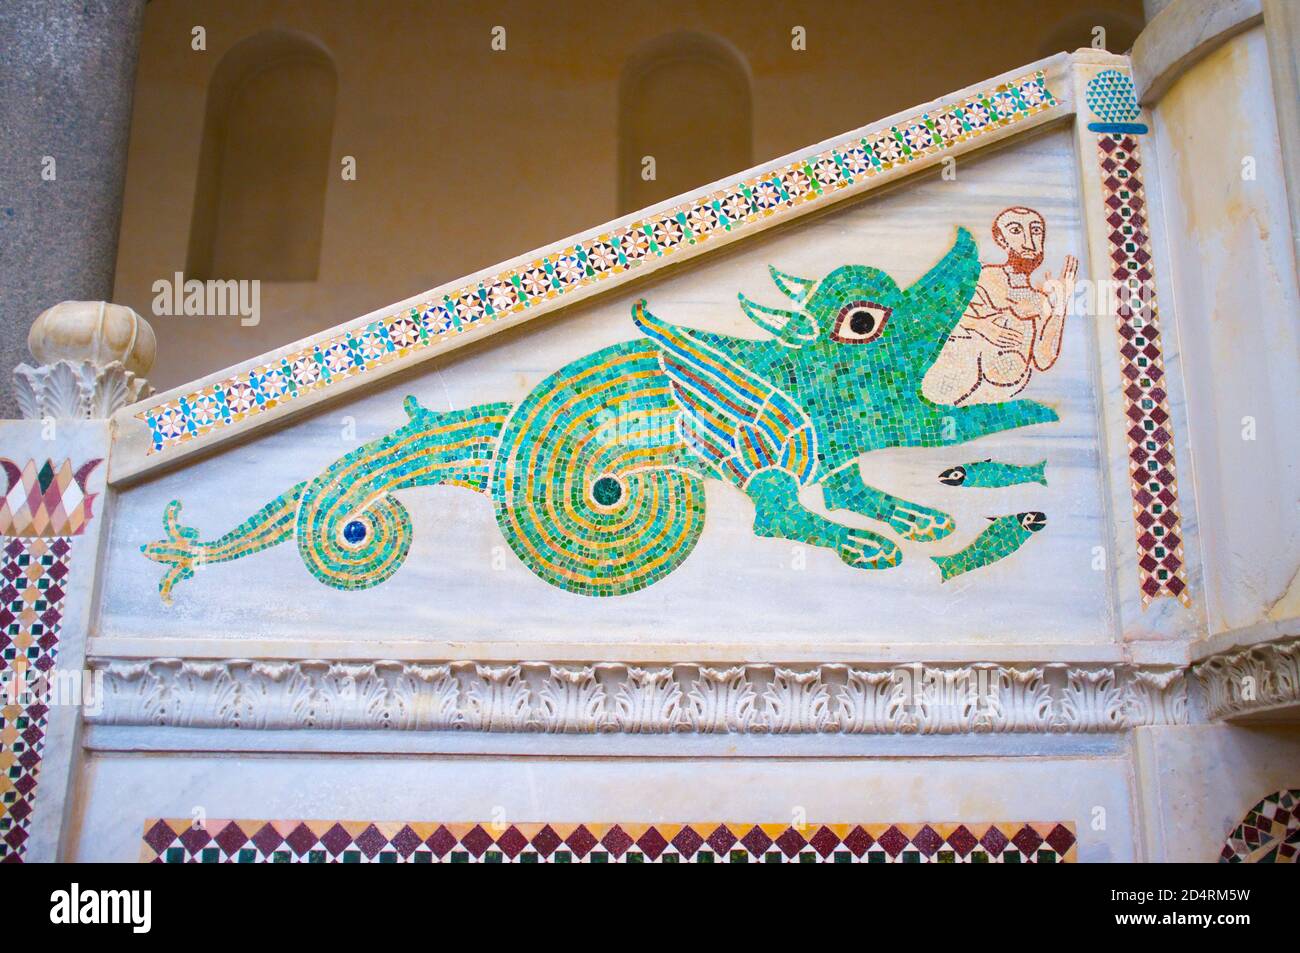 Mosaic of Jonah swallowed by the Great Fish (Whale), detail from the 13th century pulpit of the 11th Century Duomo di Ravello, Amalfi Coast, Italy. Stock Photo